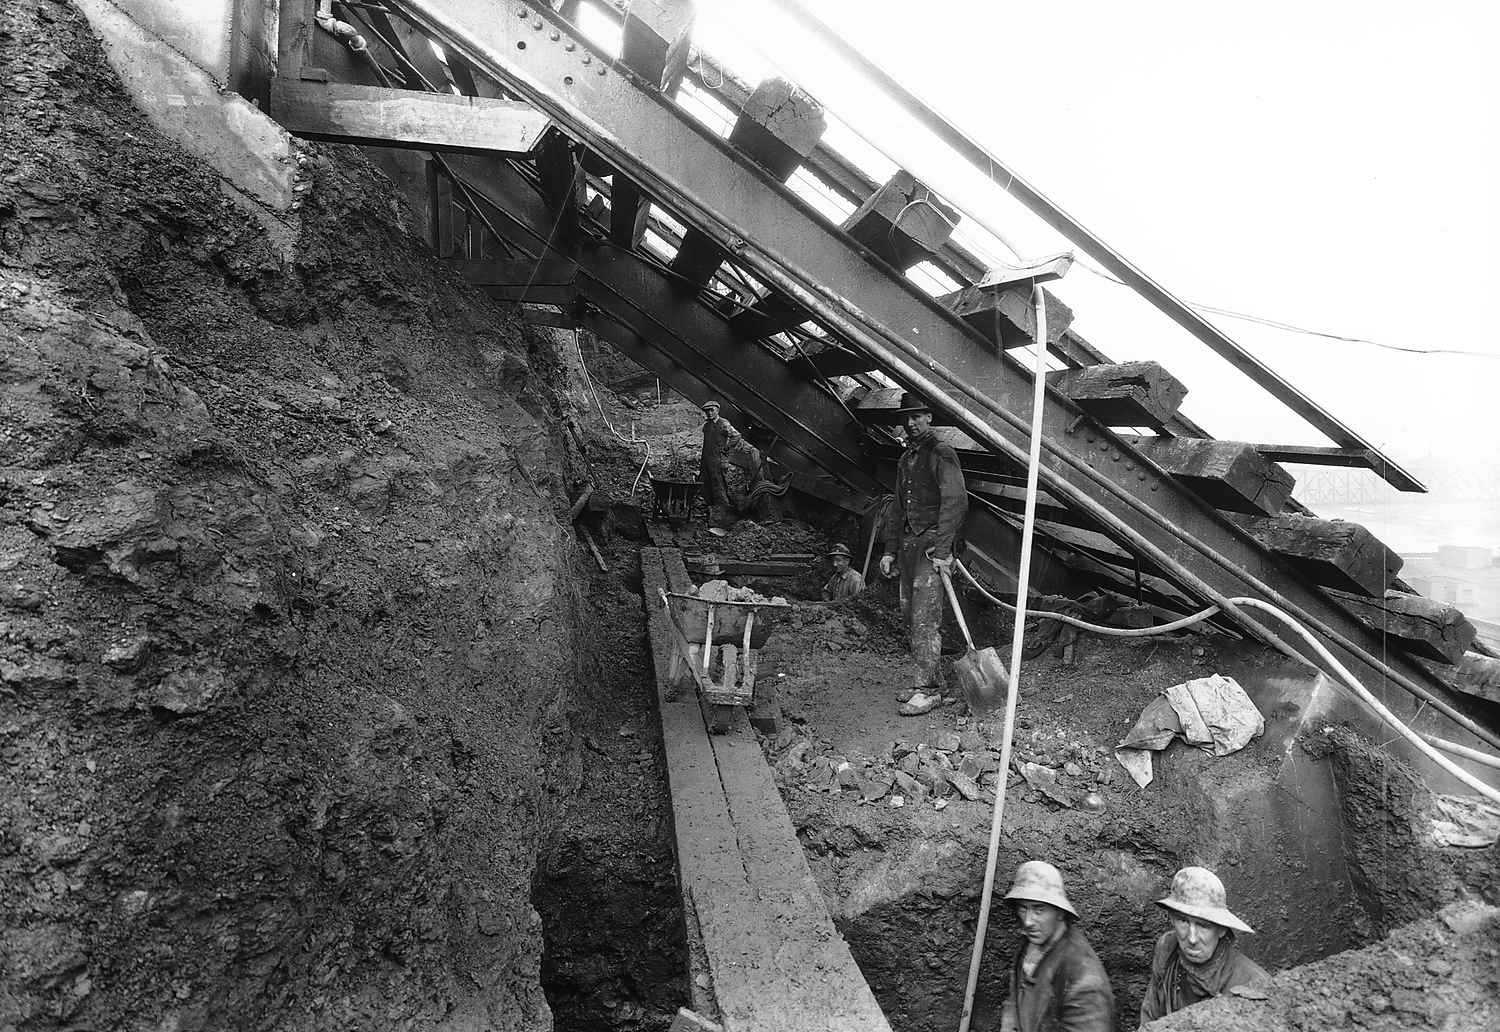 Farris Engineering Company workers, excavating the land and adding supports under the Monongahela Incline to make way for the Mount Washington Roadway. Credit: Incline Supports, December 13, 1926, Pittsburgh City Photographer Collection, Historic Pittsburgh Site